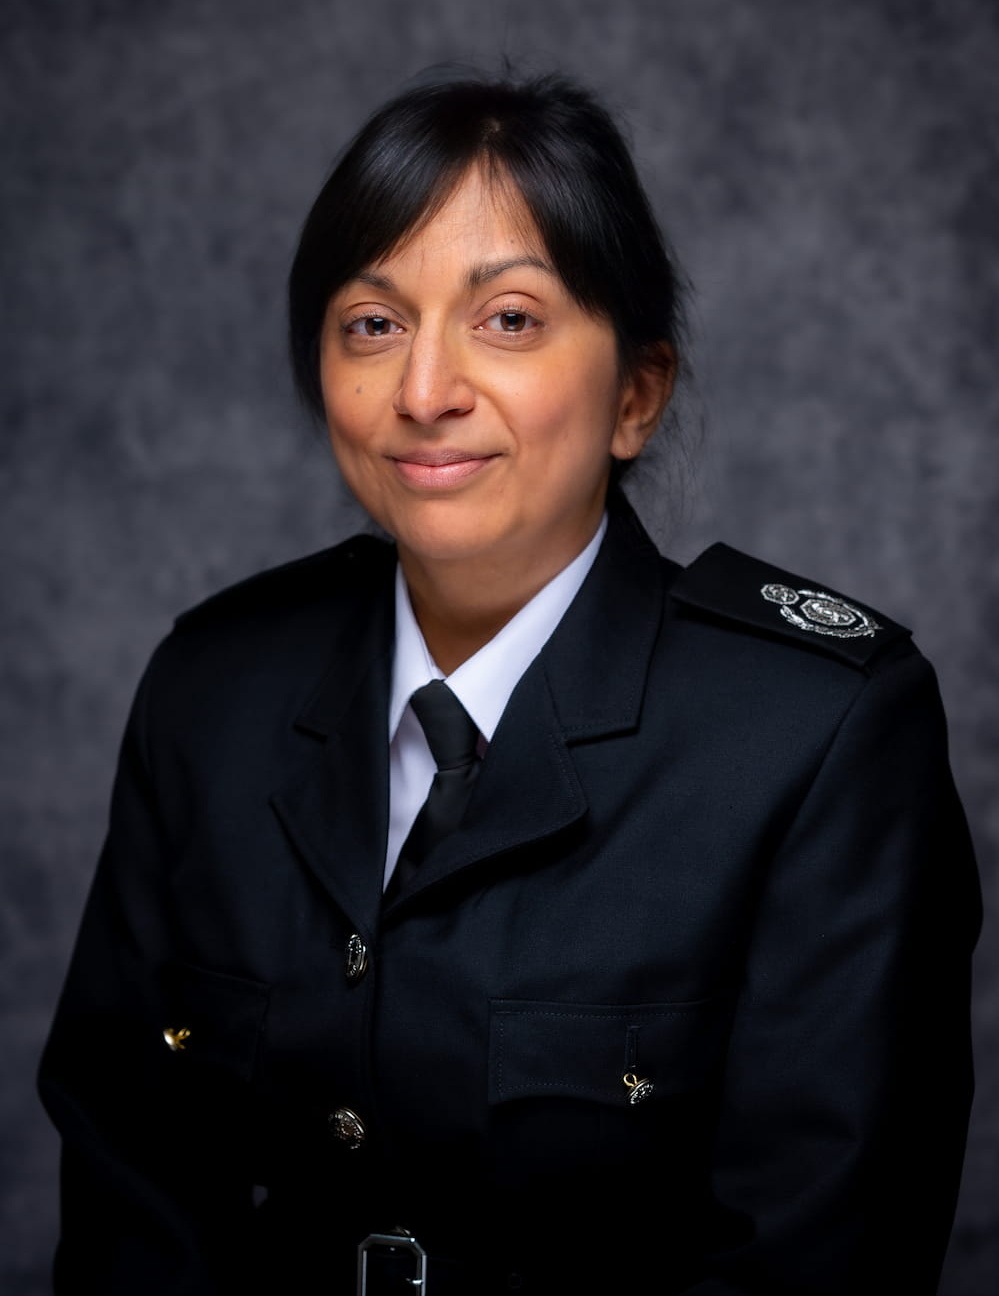 Karen Gowreesunker - Assistant Chief Fire Officer and Director for Enabling Services